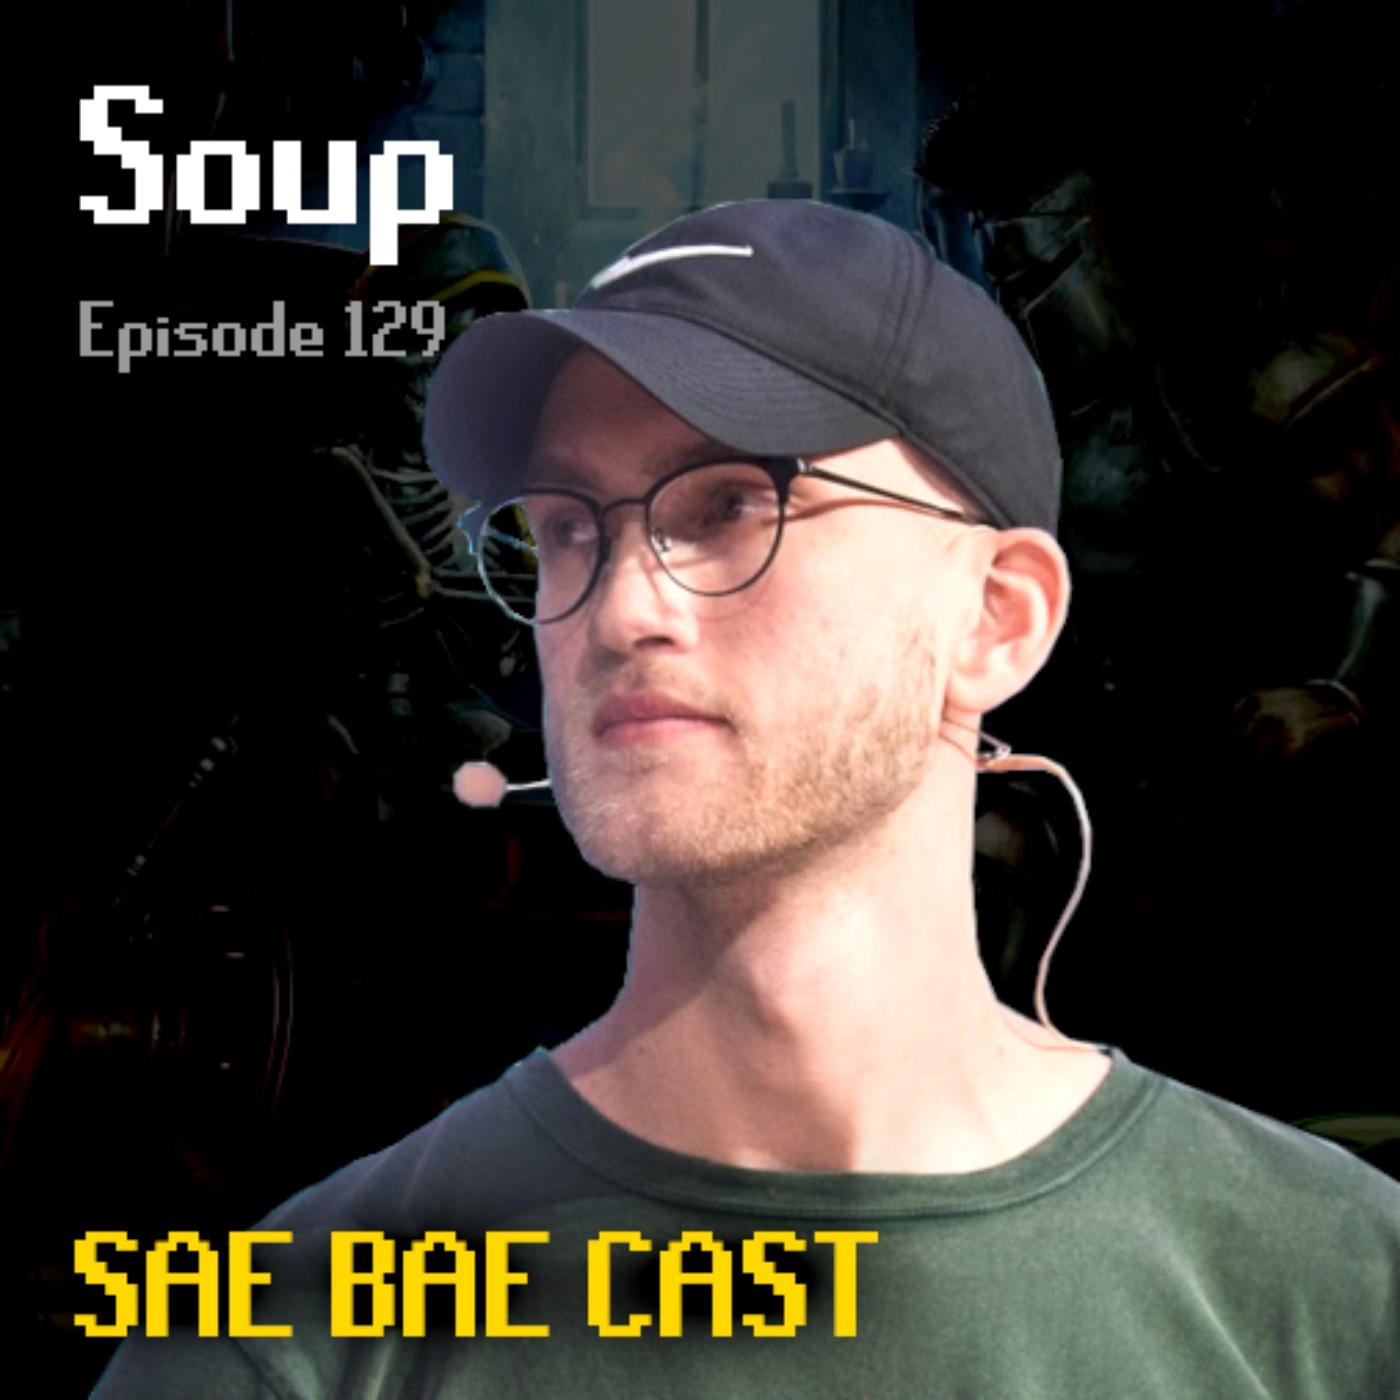 Soup - Gielinor Games, Top OSRS Creators, AI, YouTube Growth | Sae Bae Cast 129